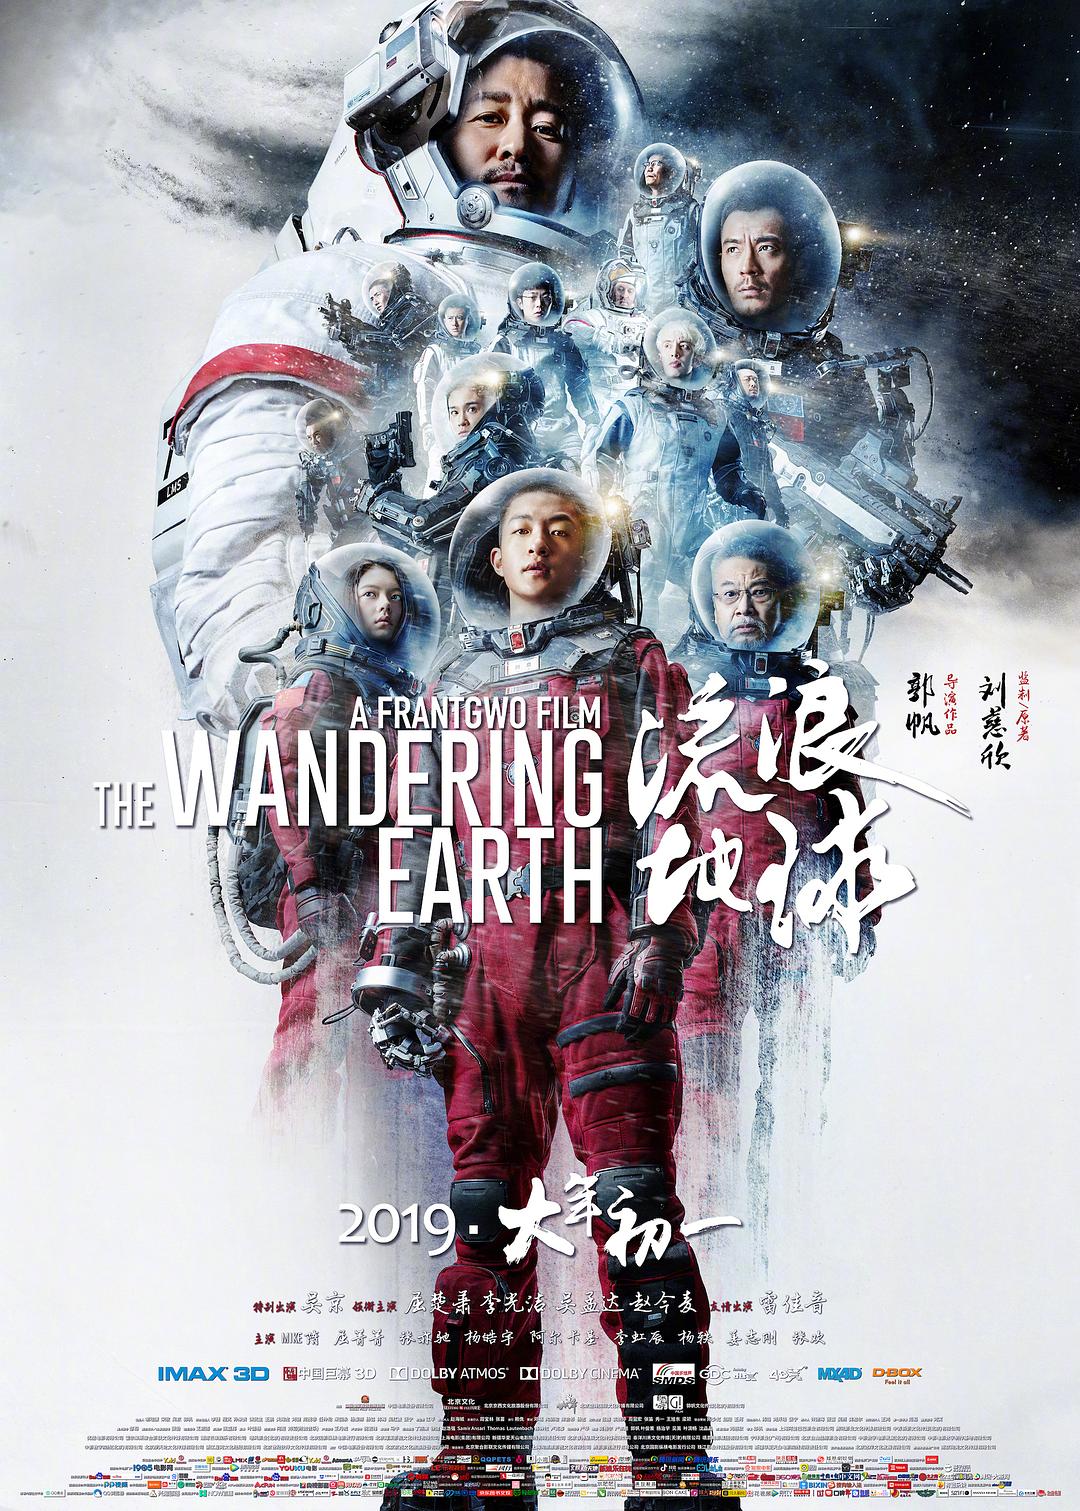 ˵ The.Wandering.Earth.2019.CHINESE.1080p.BluRay.x264.TrueHD.7.1.Atmos-FGT 14.-1.png